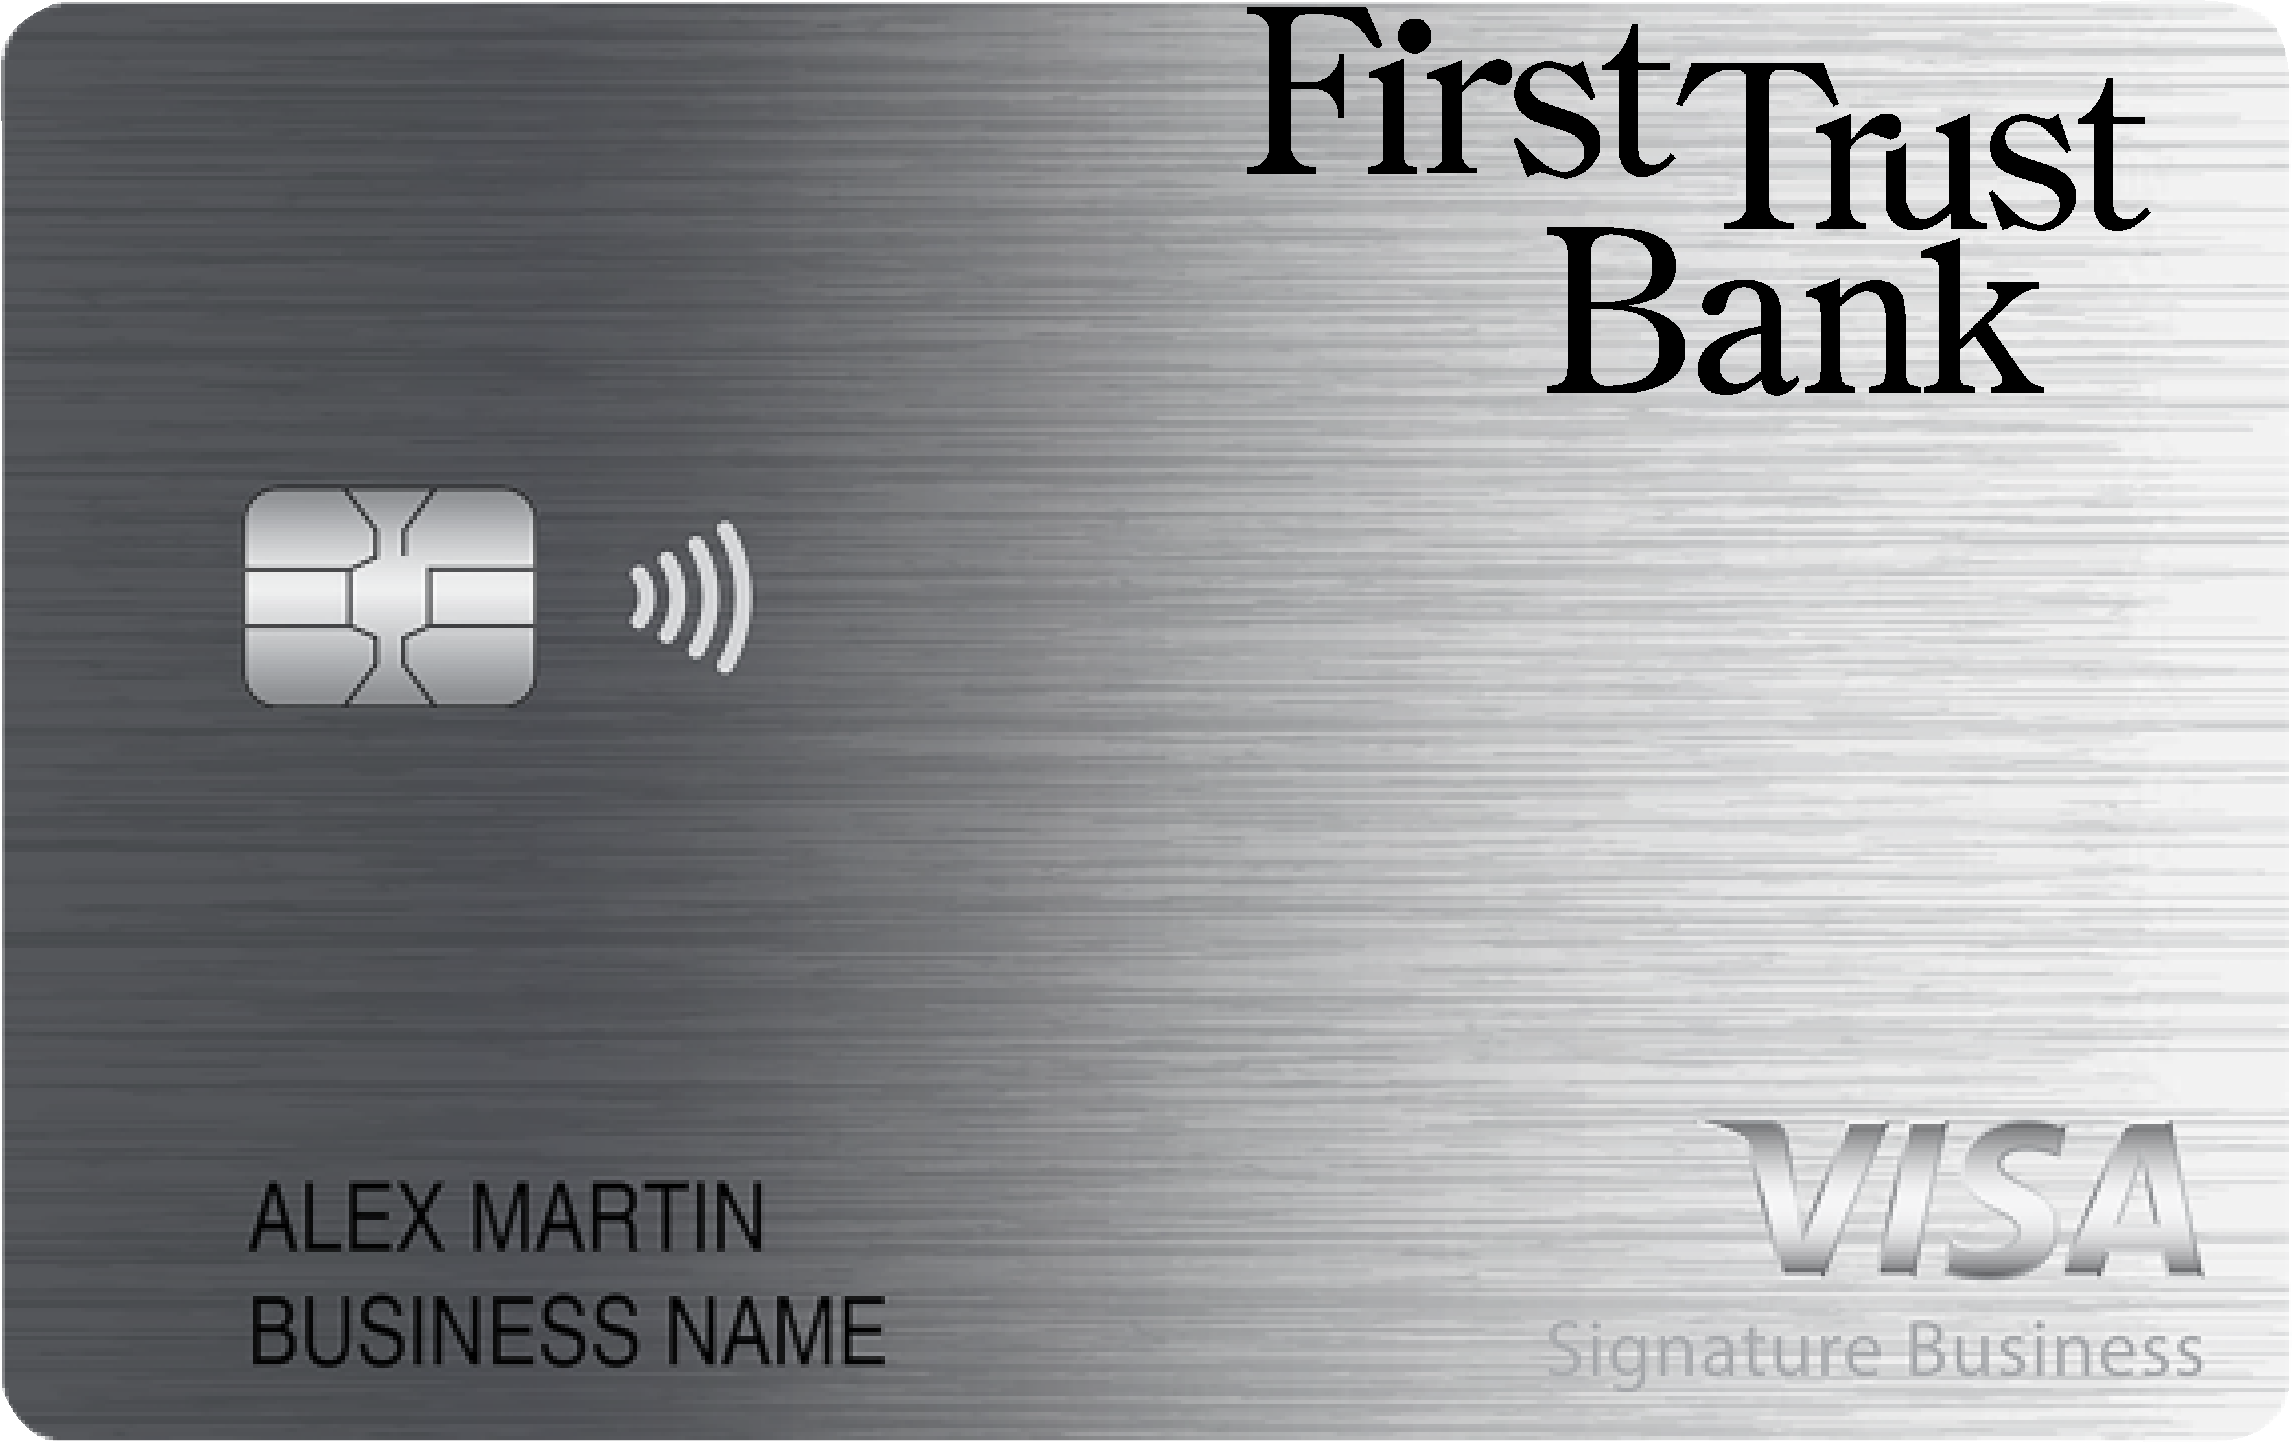 First Trust Bank Of Illinois Smart Business Rewards Card